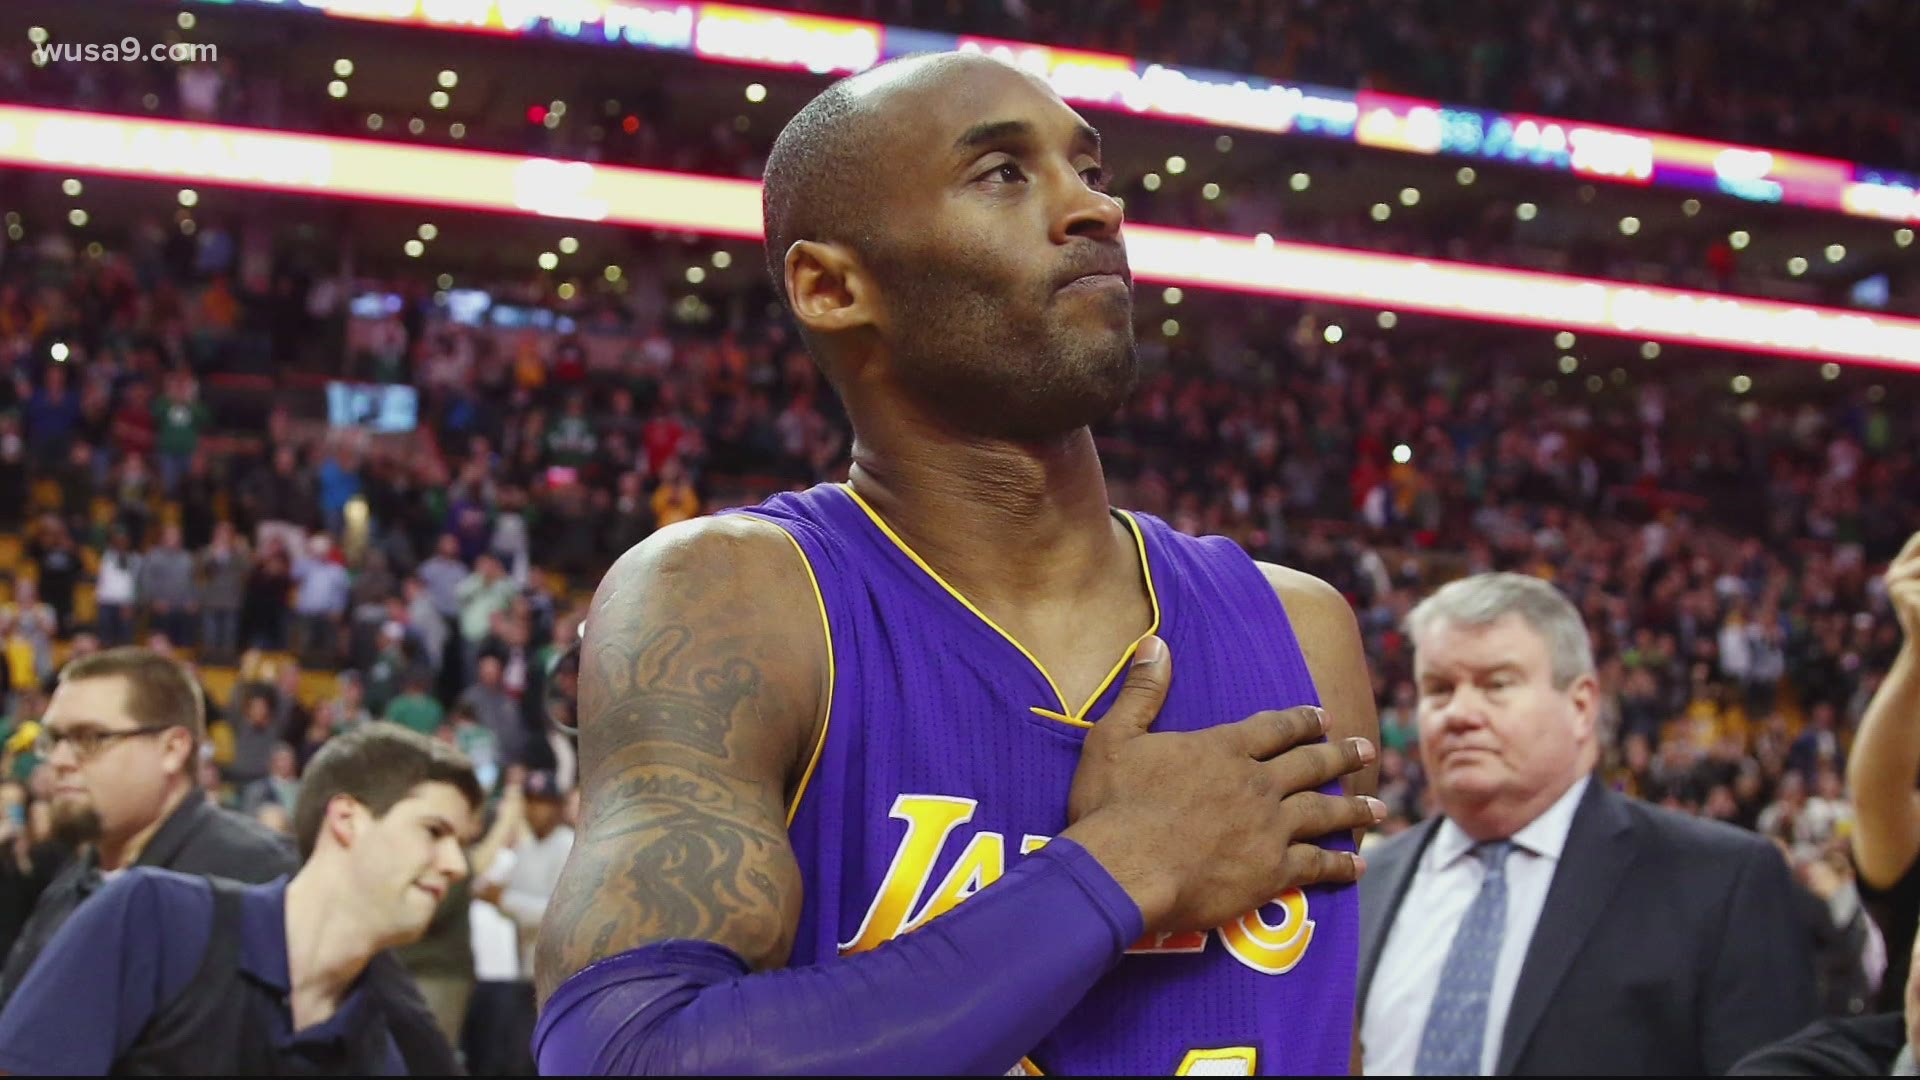 Kobe Bryant Death Fans Remembered Los Angeles Lakers Wusa9 Com